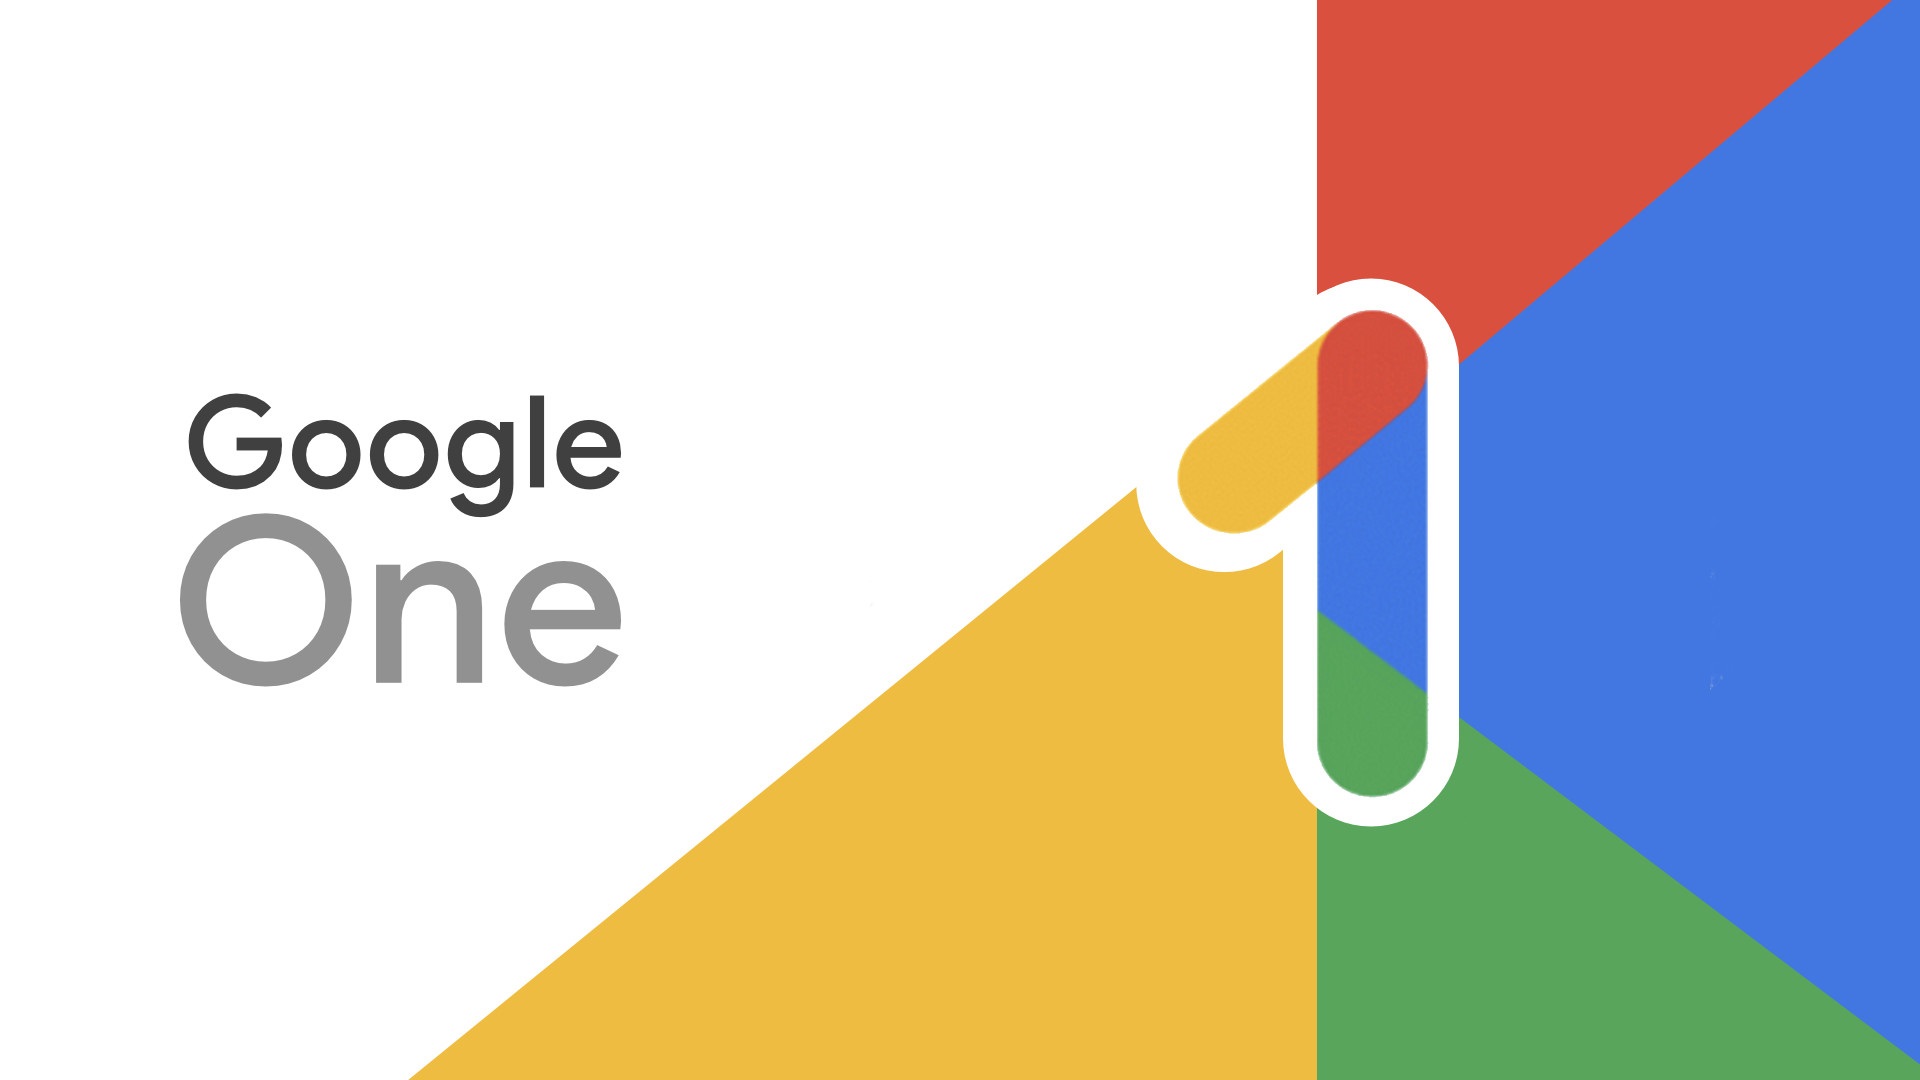 Google One VPN will cease operations by the end of this year